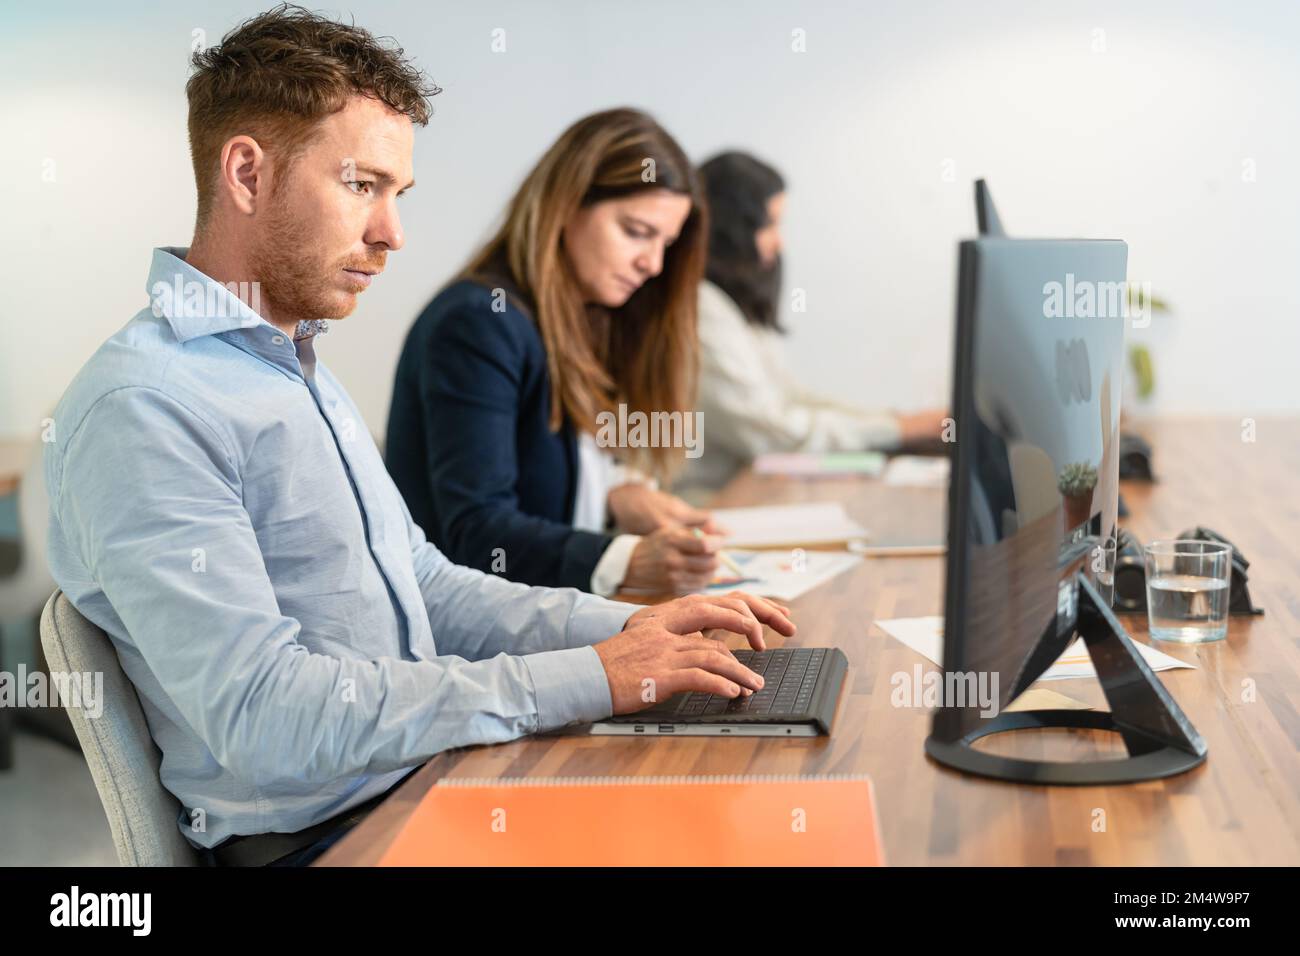 Business people working inside coworking creative space Stock Photo